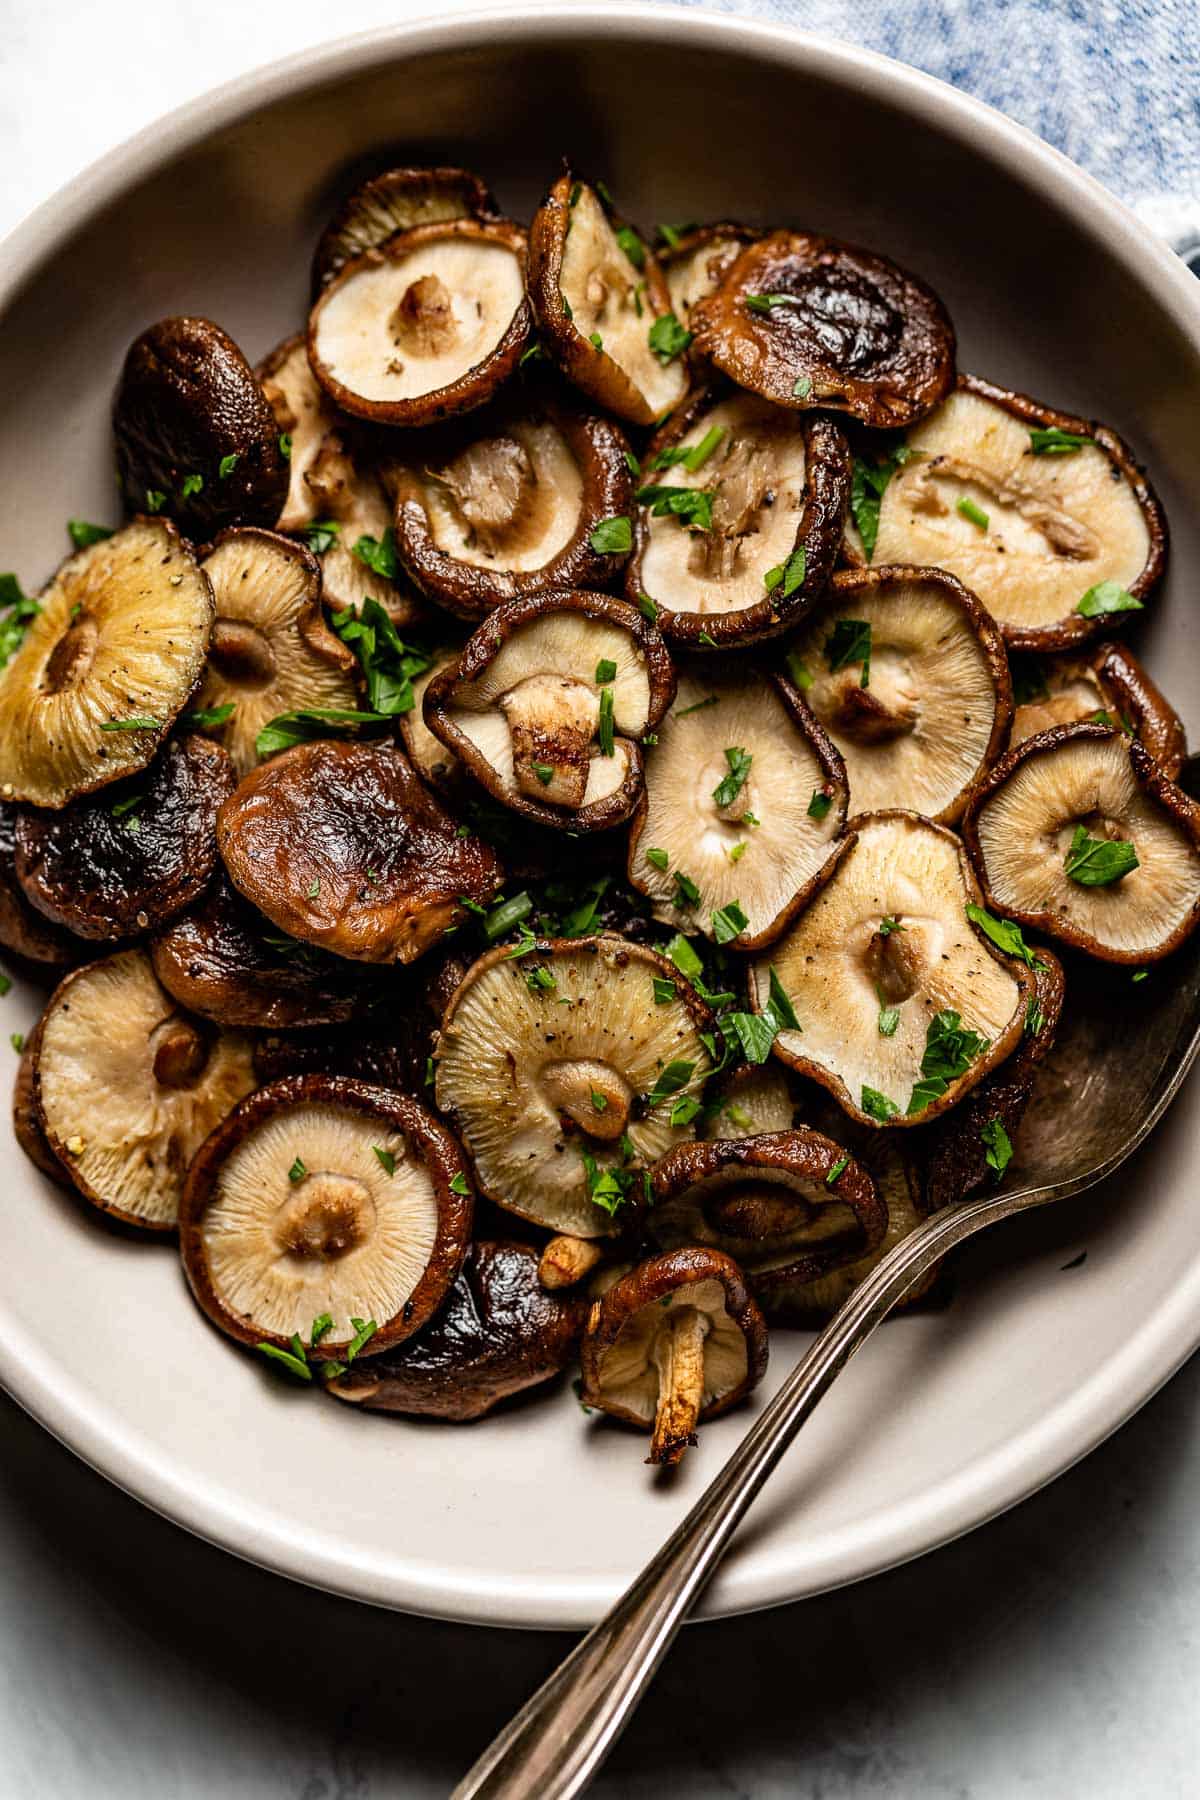 Baked Shiitake mushrooms in a plate with a spoon on the side